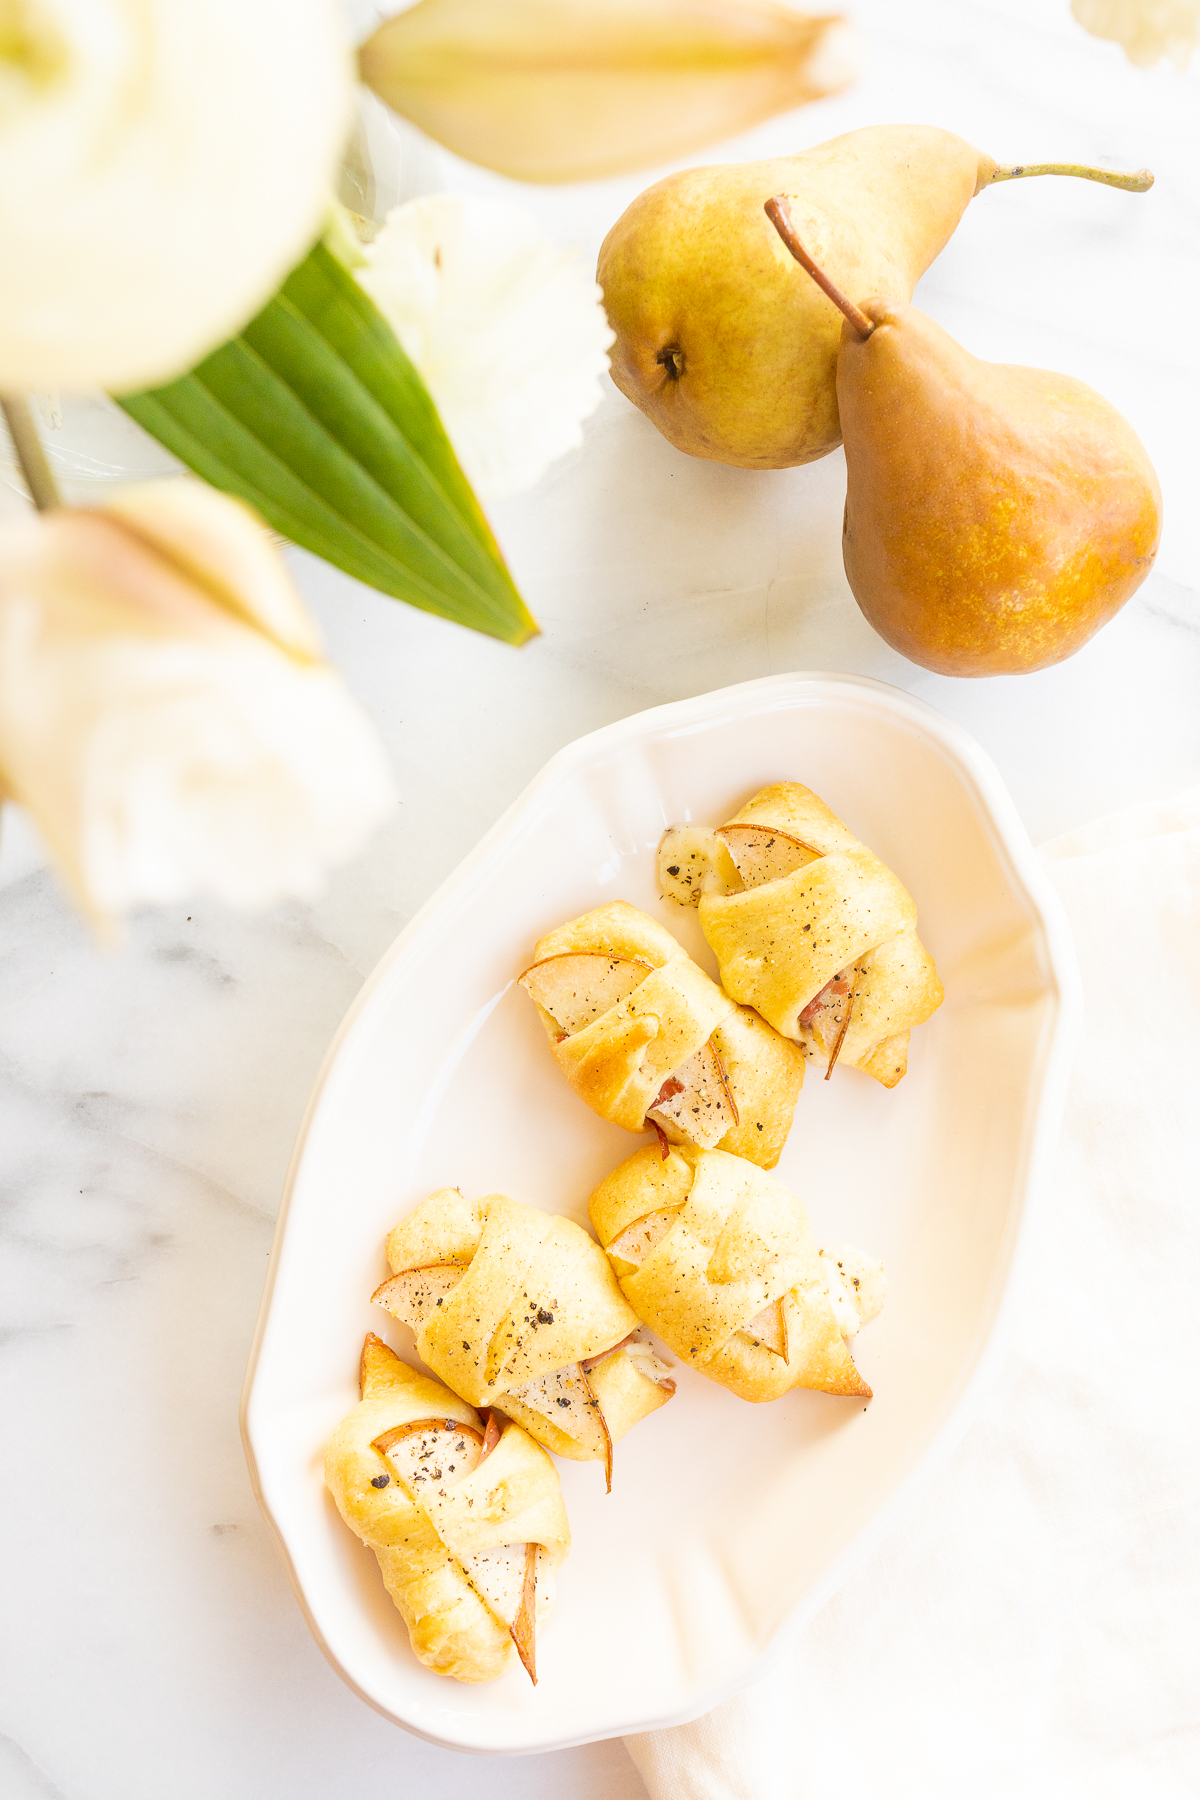 A plate with pears and flowers on it, accompanied by mouthwatering crescent roll appetizers.